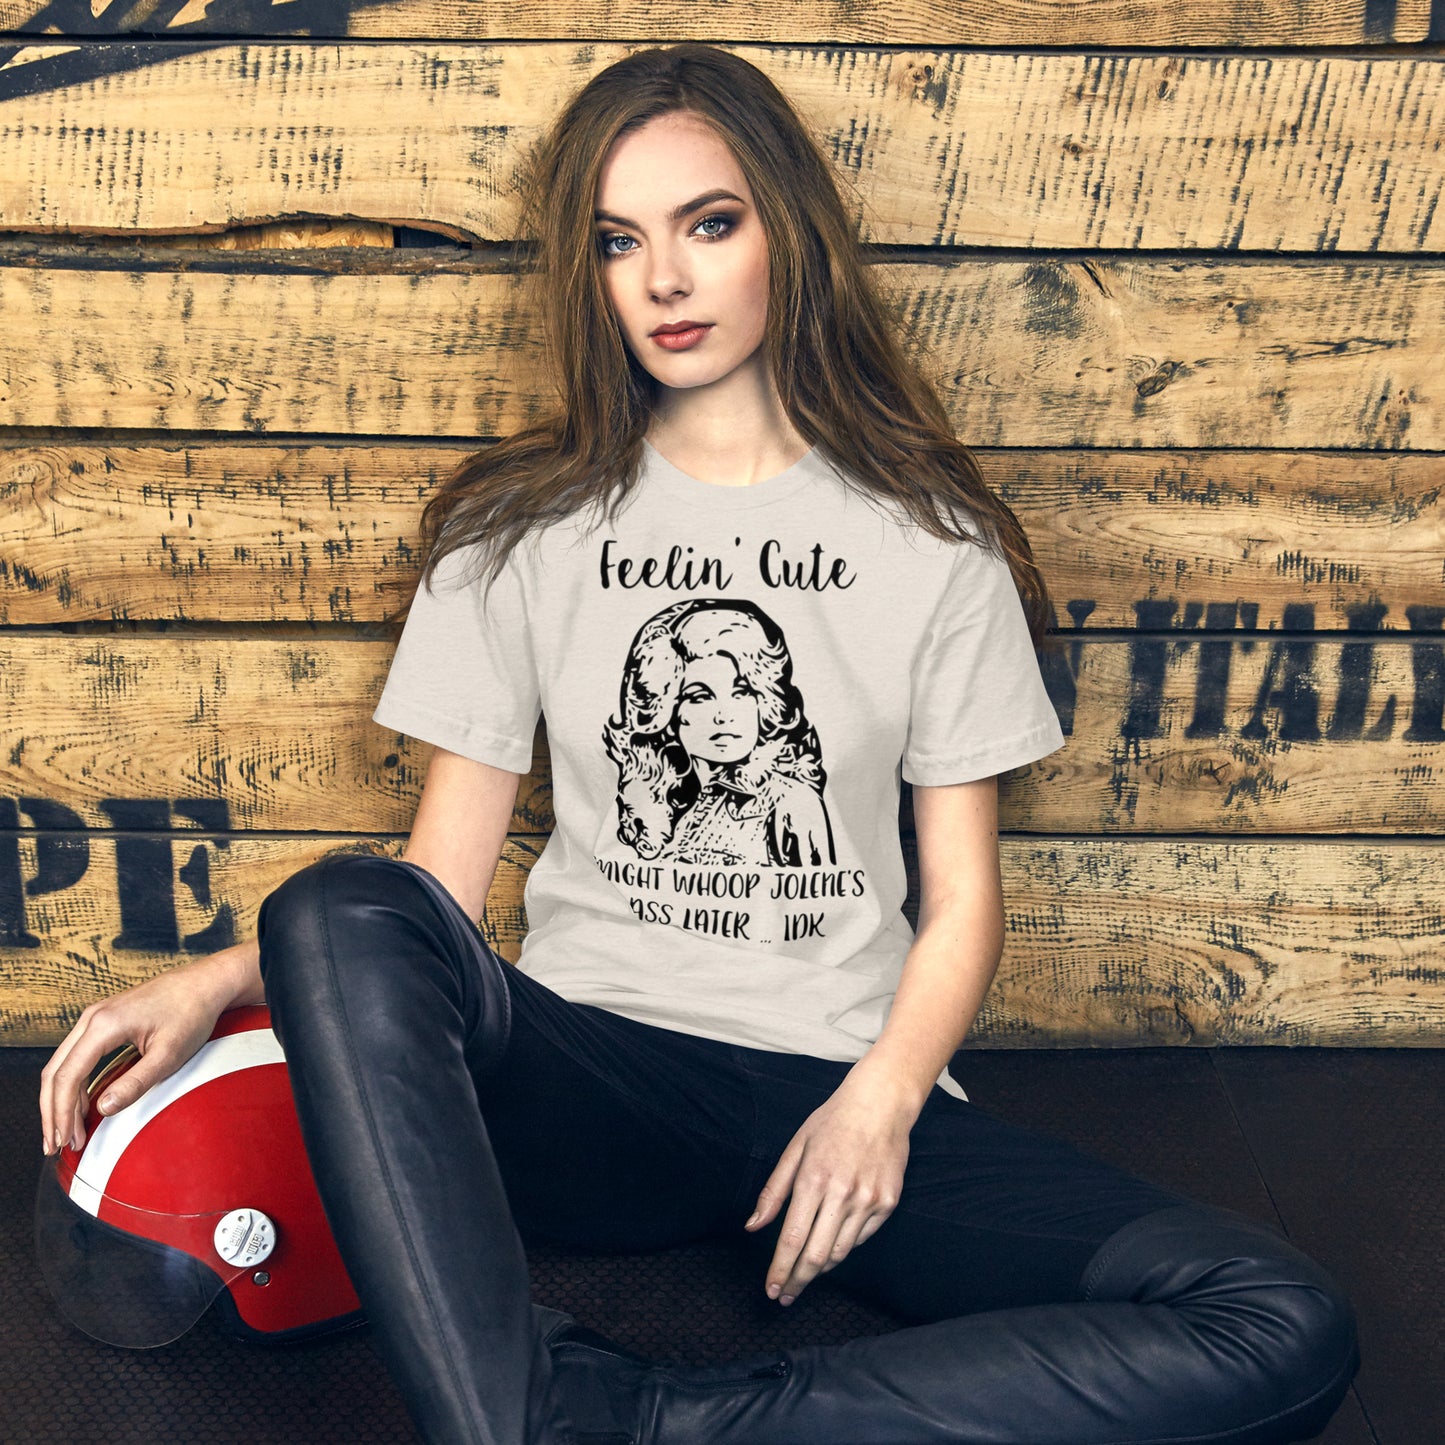 Feelin' Cute - Get Your Twang On with Classic Country Tees - The Ultimate Unisex T-Shirt for True Country Souls! - Classic Country Tees